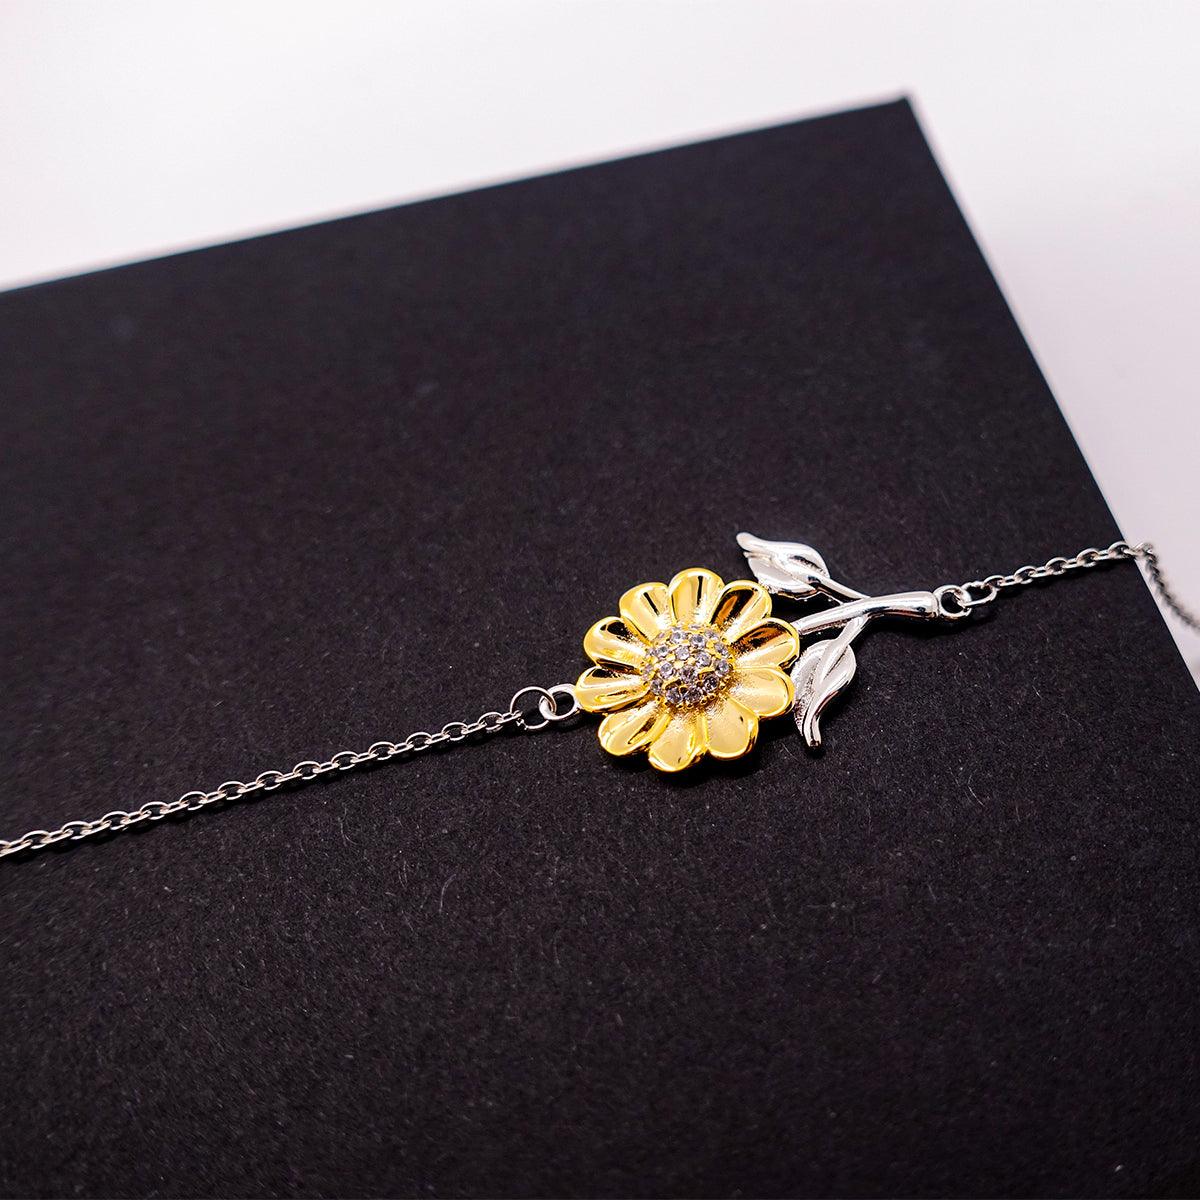 Remarkable Farmer Gifts, Your dedication and hard work, Inspirational Birthday Christmas Unique Sunflower Bracelet For Farmer, Coworkers, Men, Women, Friends - Mallard Moon Gift Shop